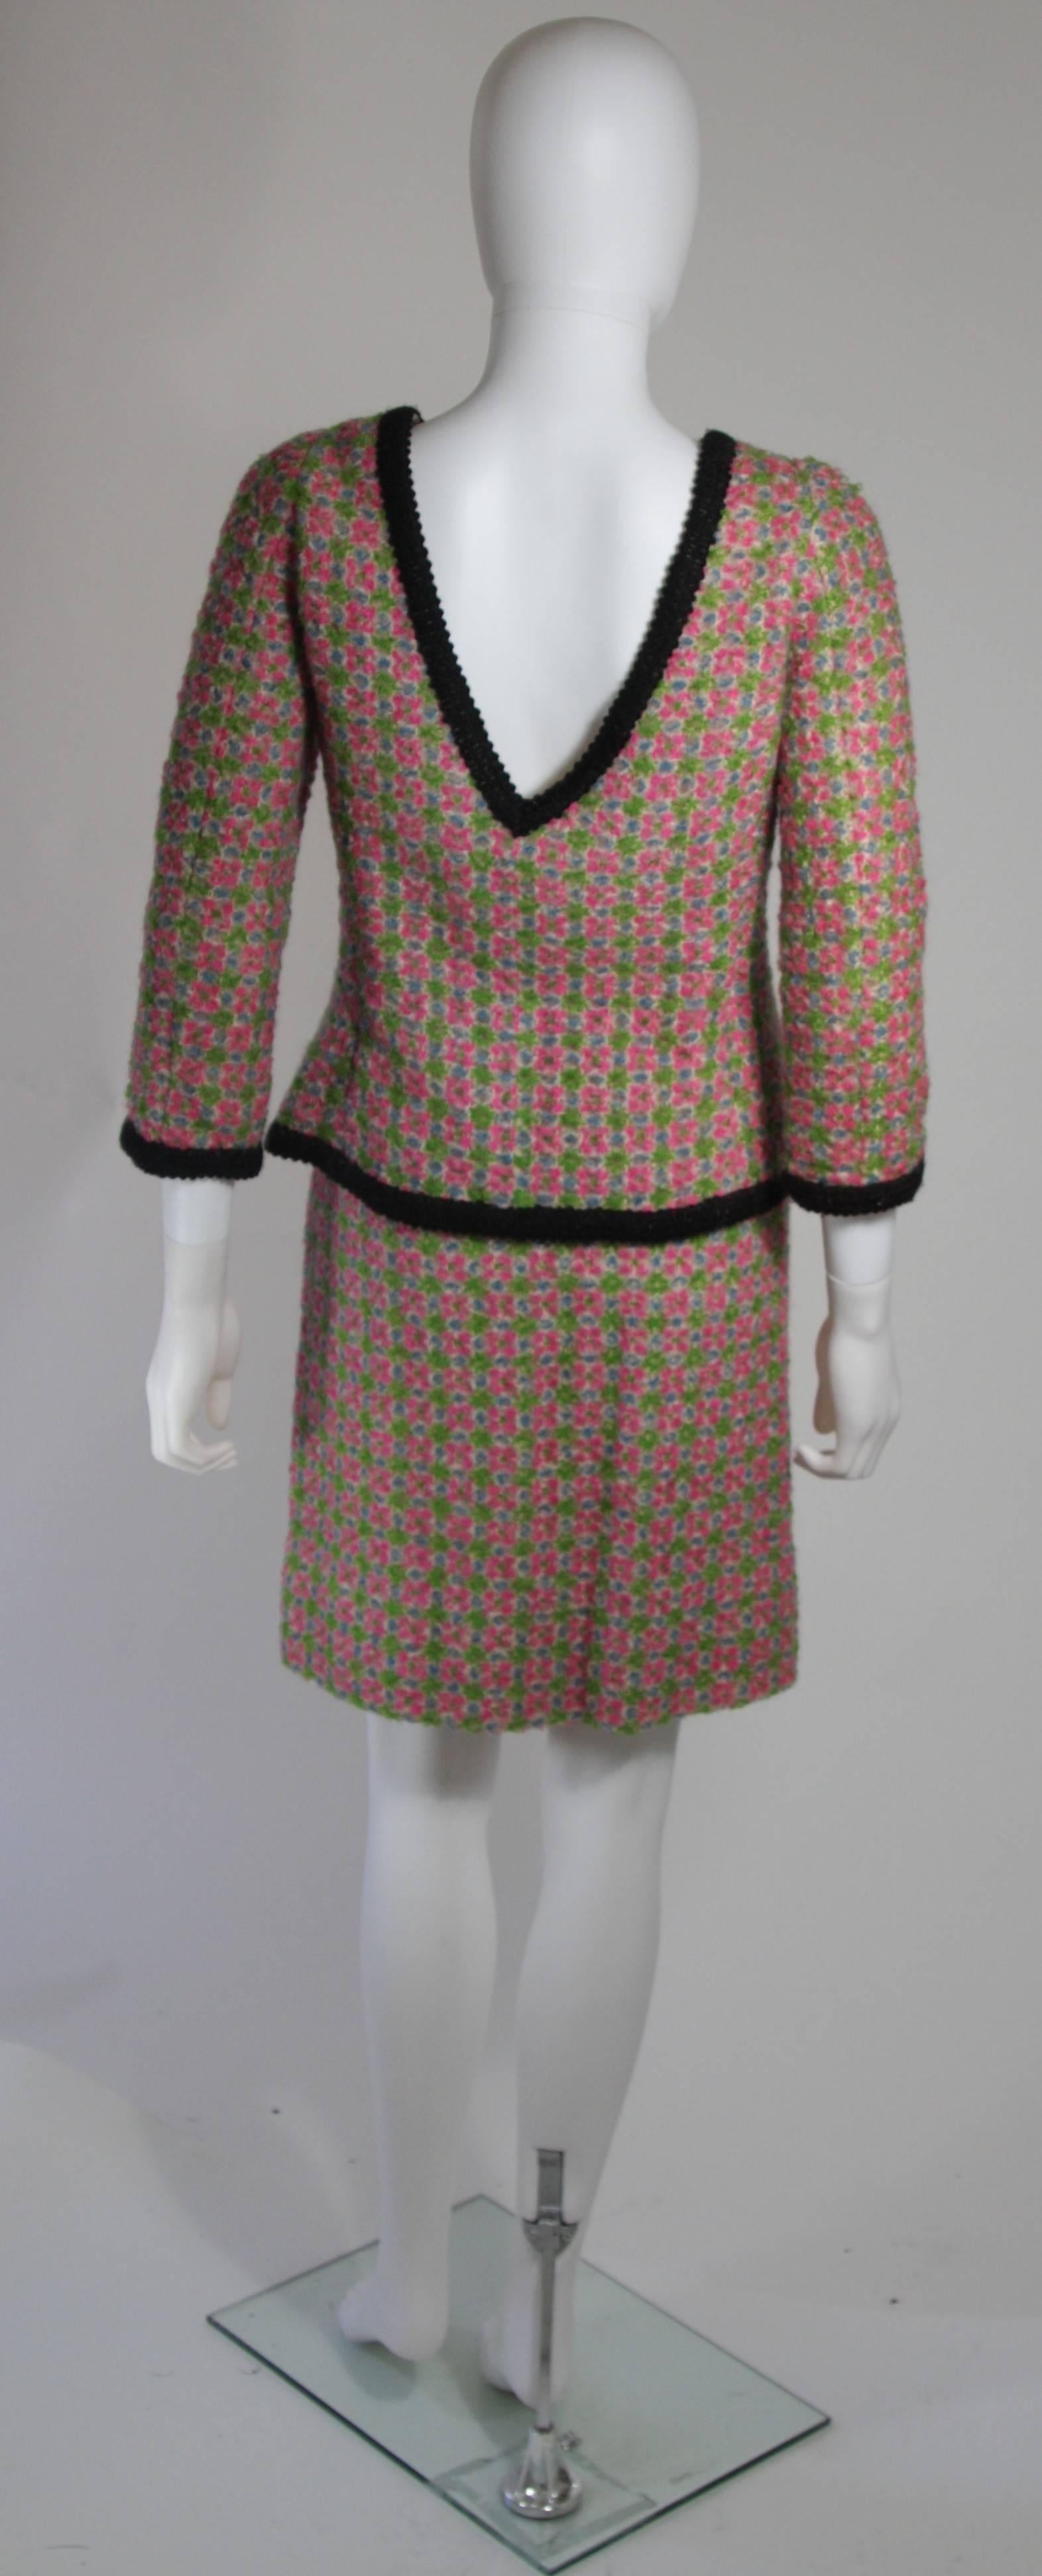 Galanos Wool Skirt Suit in Green Pink White and Black Size Small Medium In Excellent Condition For Sale In Los Angeles, CA